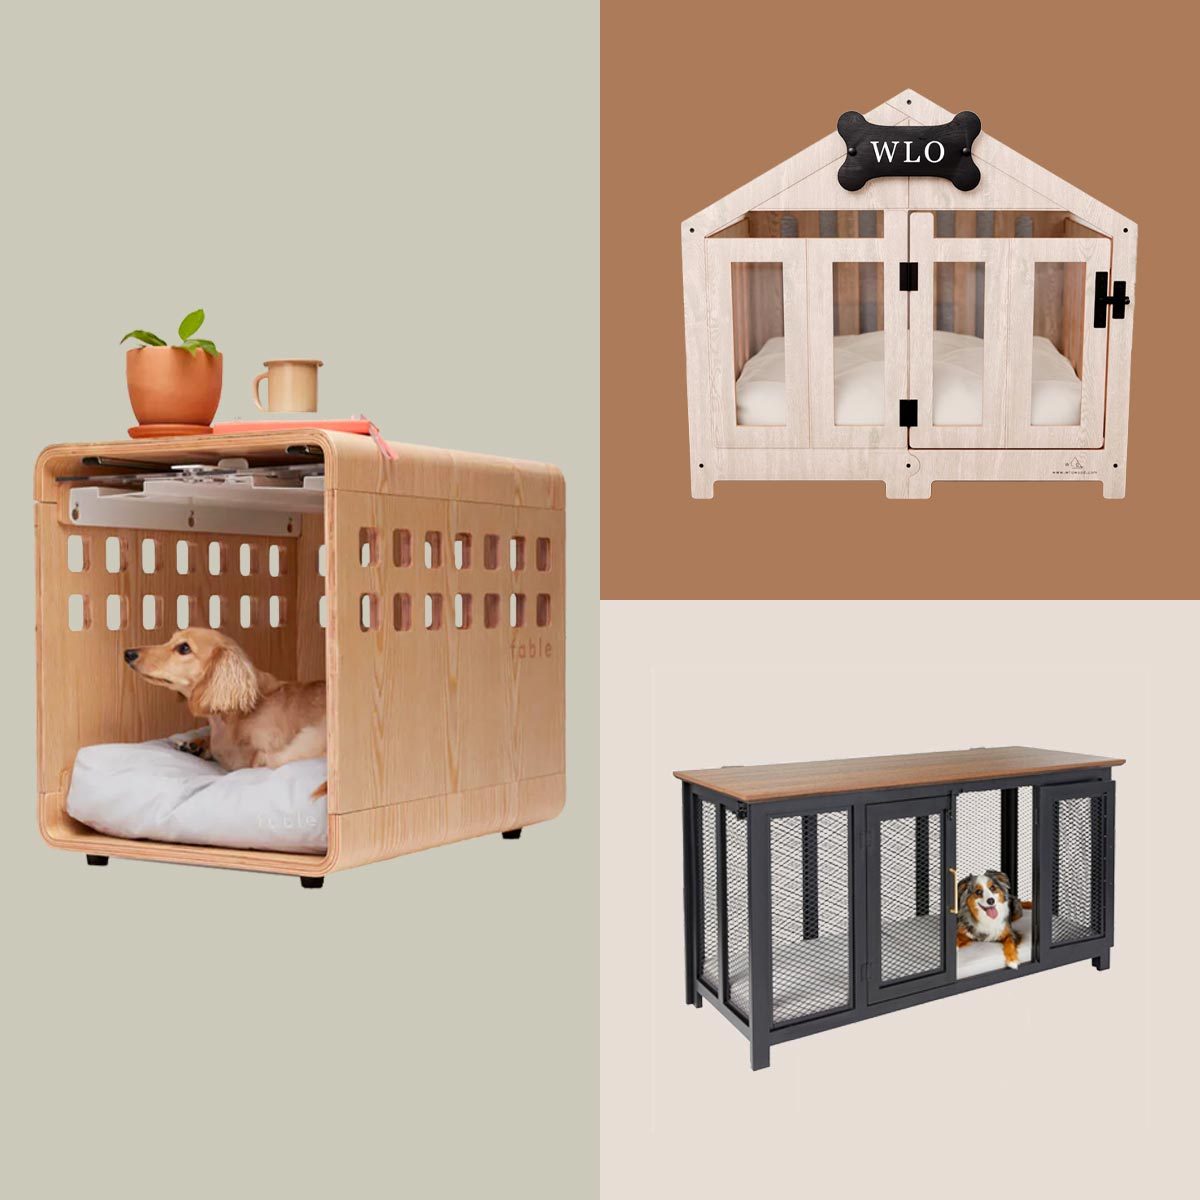 3 Top Trending Stylish Dog Crates and Their Features